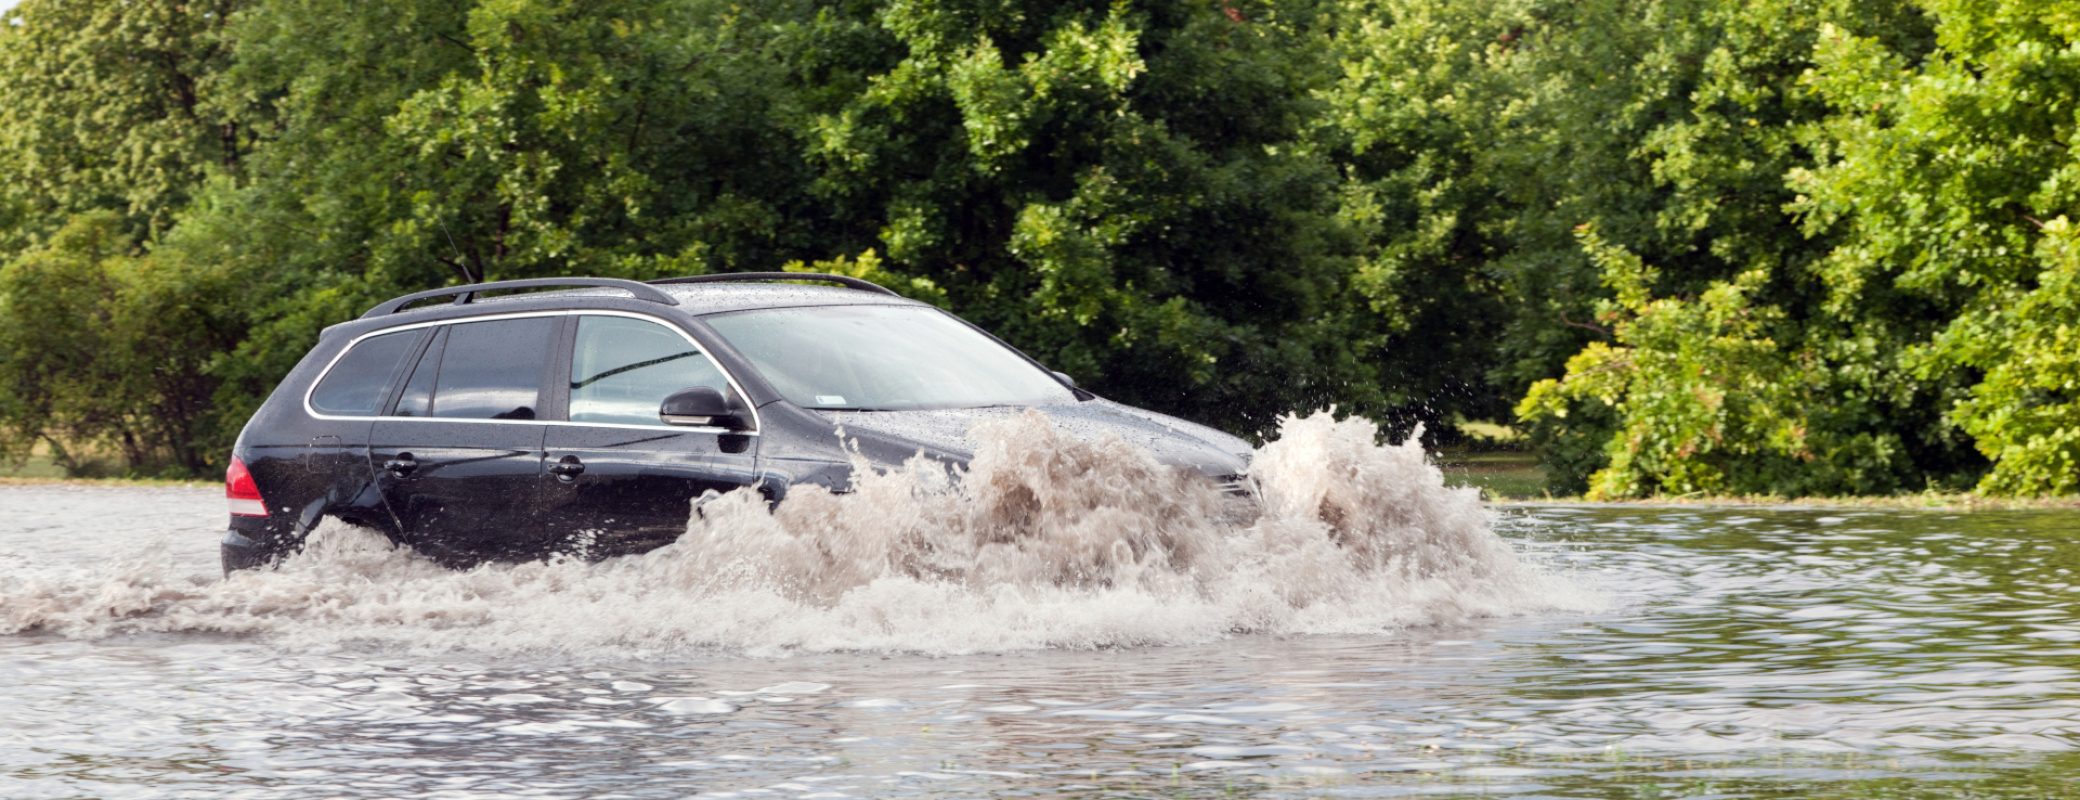 GDANSK, POLAND - July 28: Car trying to drive against flood on the street on July 28, 2015 in Gdansk, Poland. Storms and heavy rains hit many parts of Poland and Europe